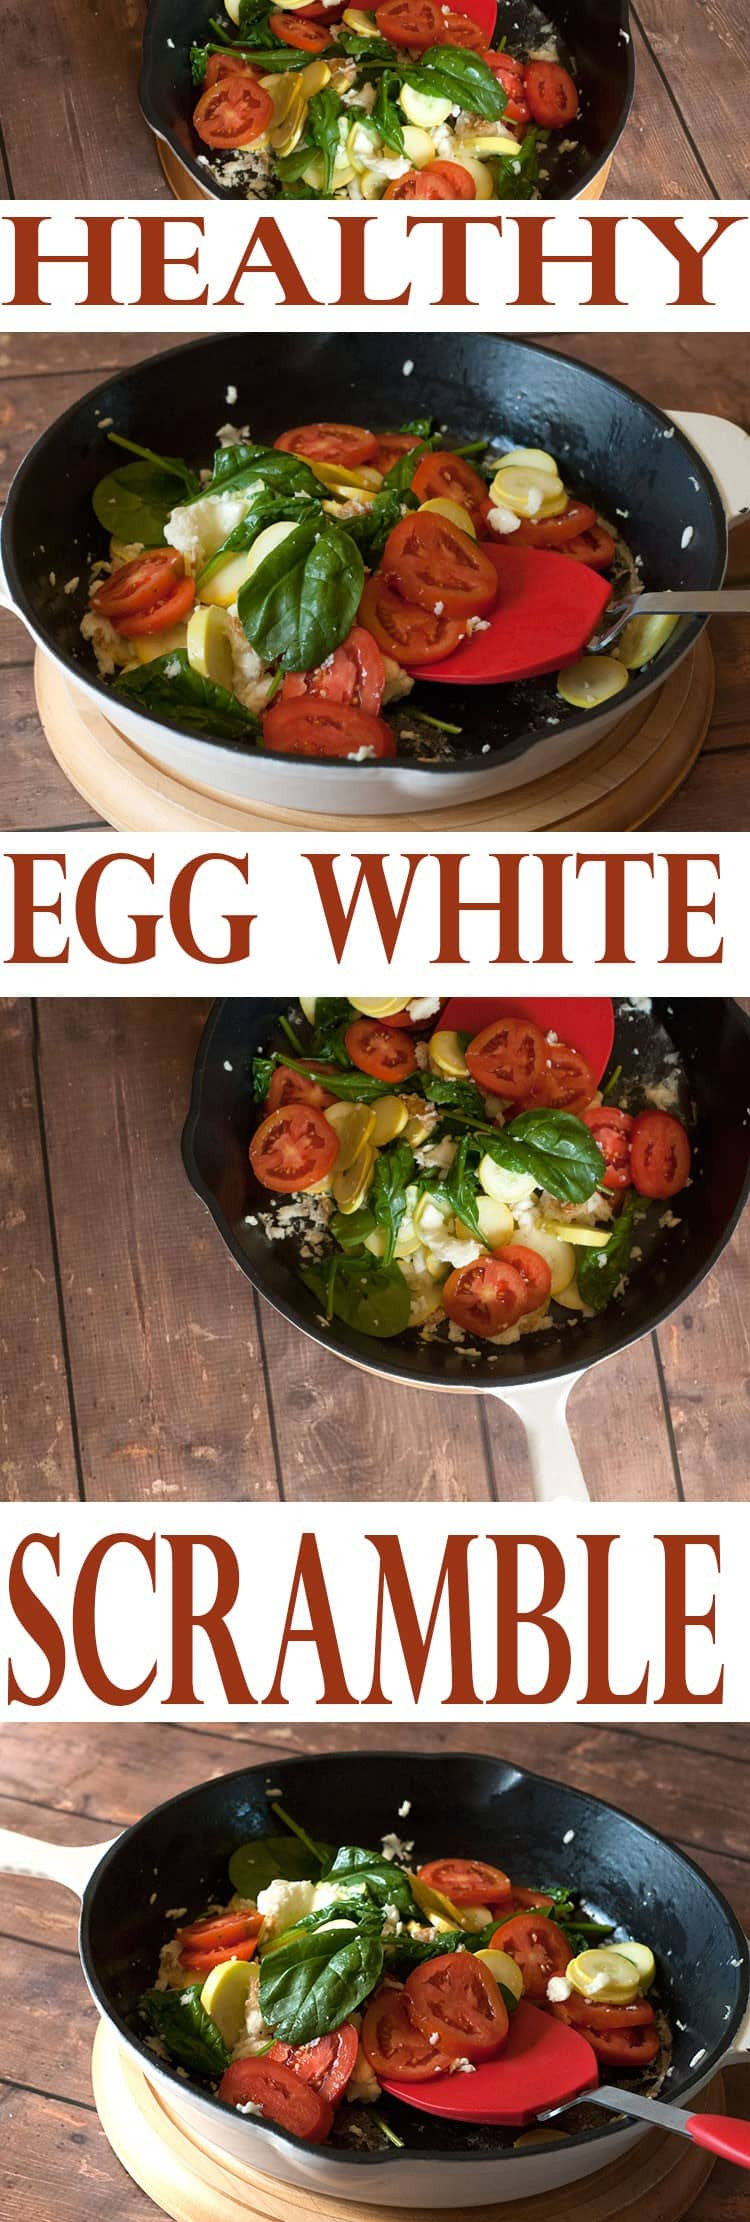 Egg White Recipes For Weight Loss
 Healthy Egg White Scramble Healthy Recipes for Breakfast